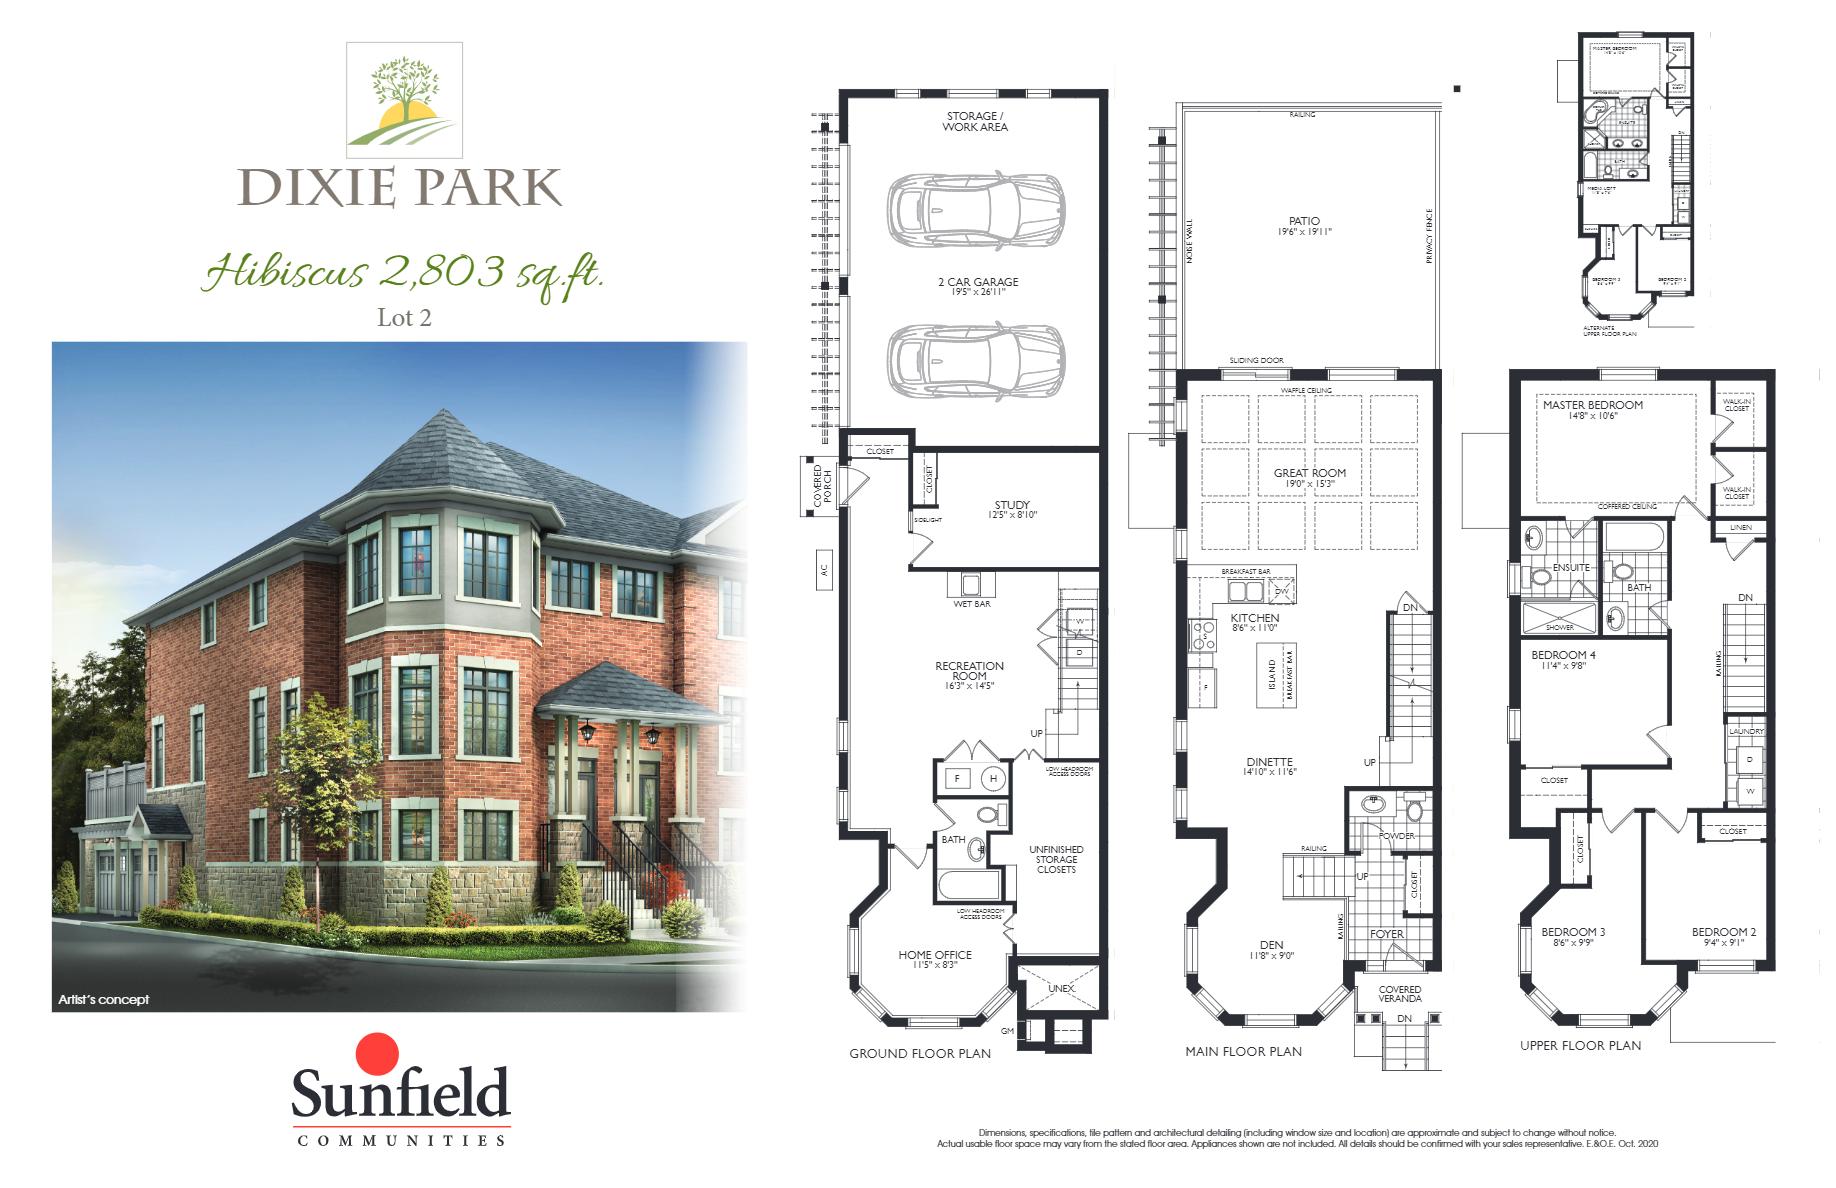  Floor Plan of Dixie Park with undefined beds